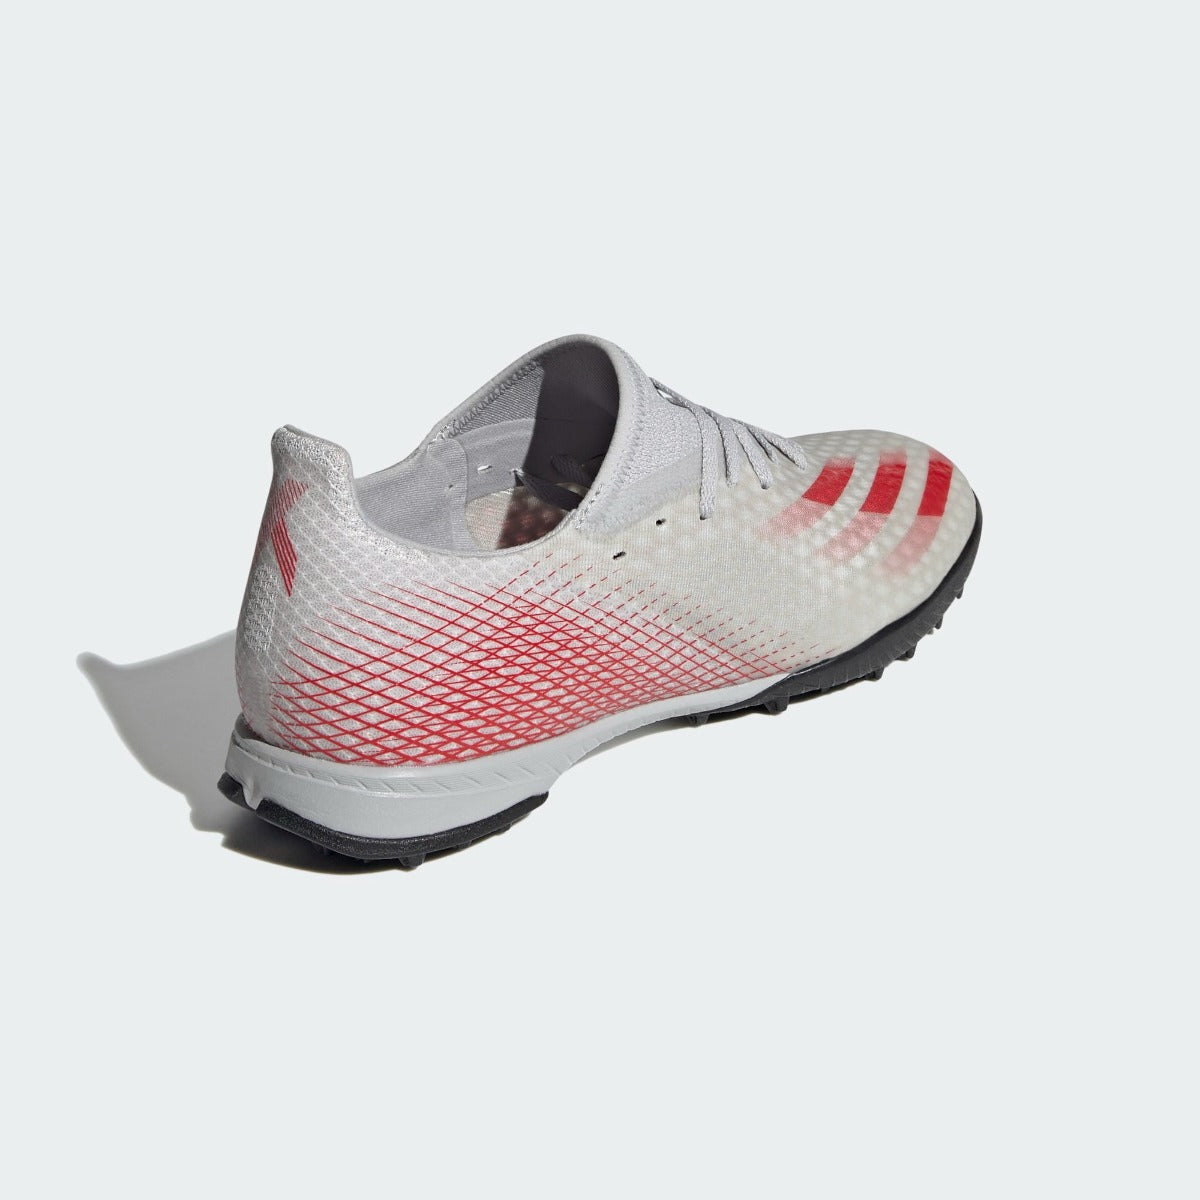 Adidas X Ghosted .3 TF - Grey-Red (Diagonal 2)